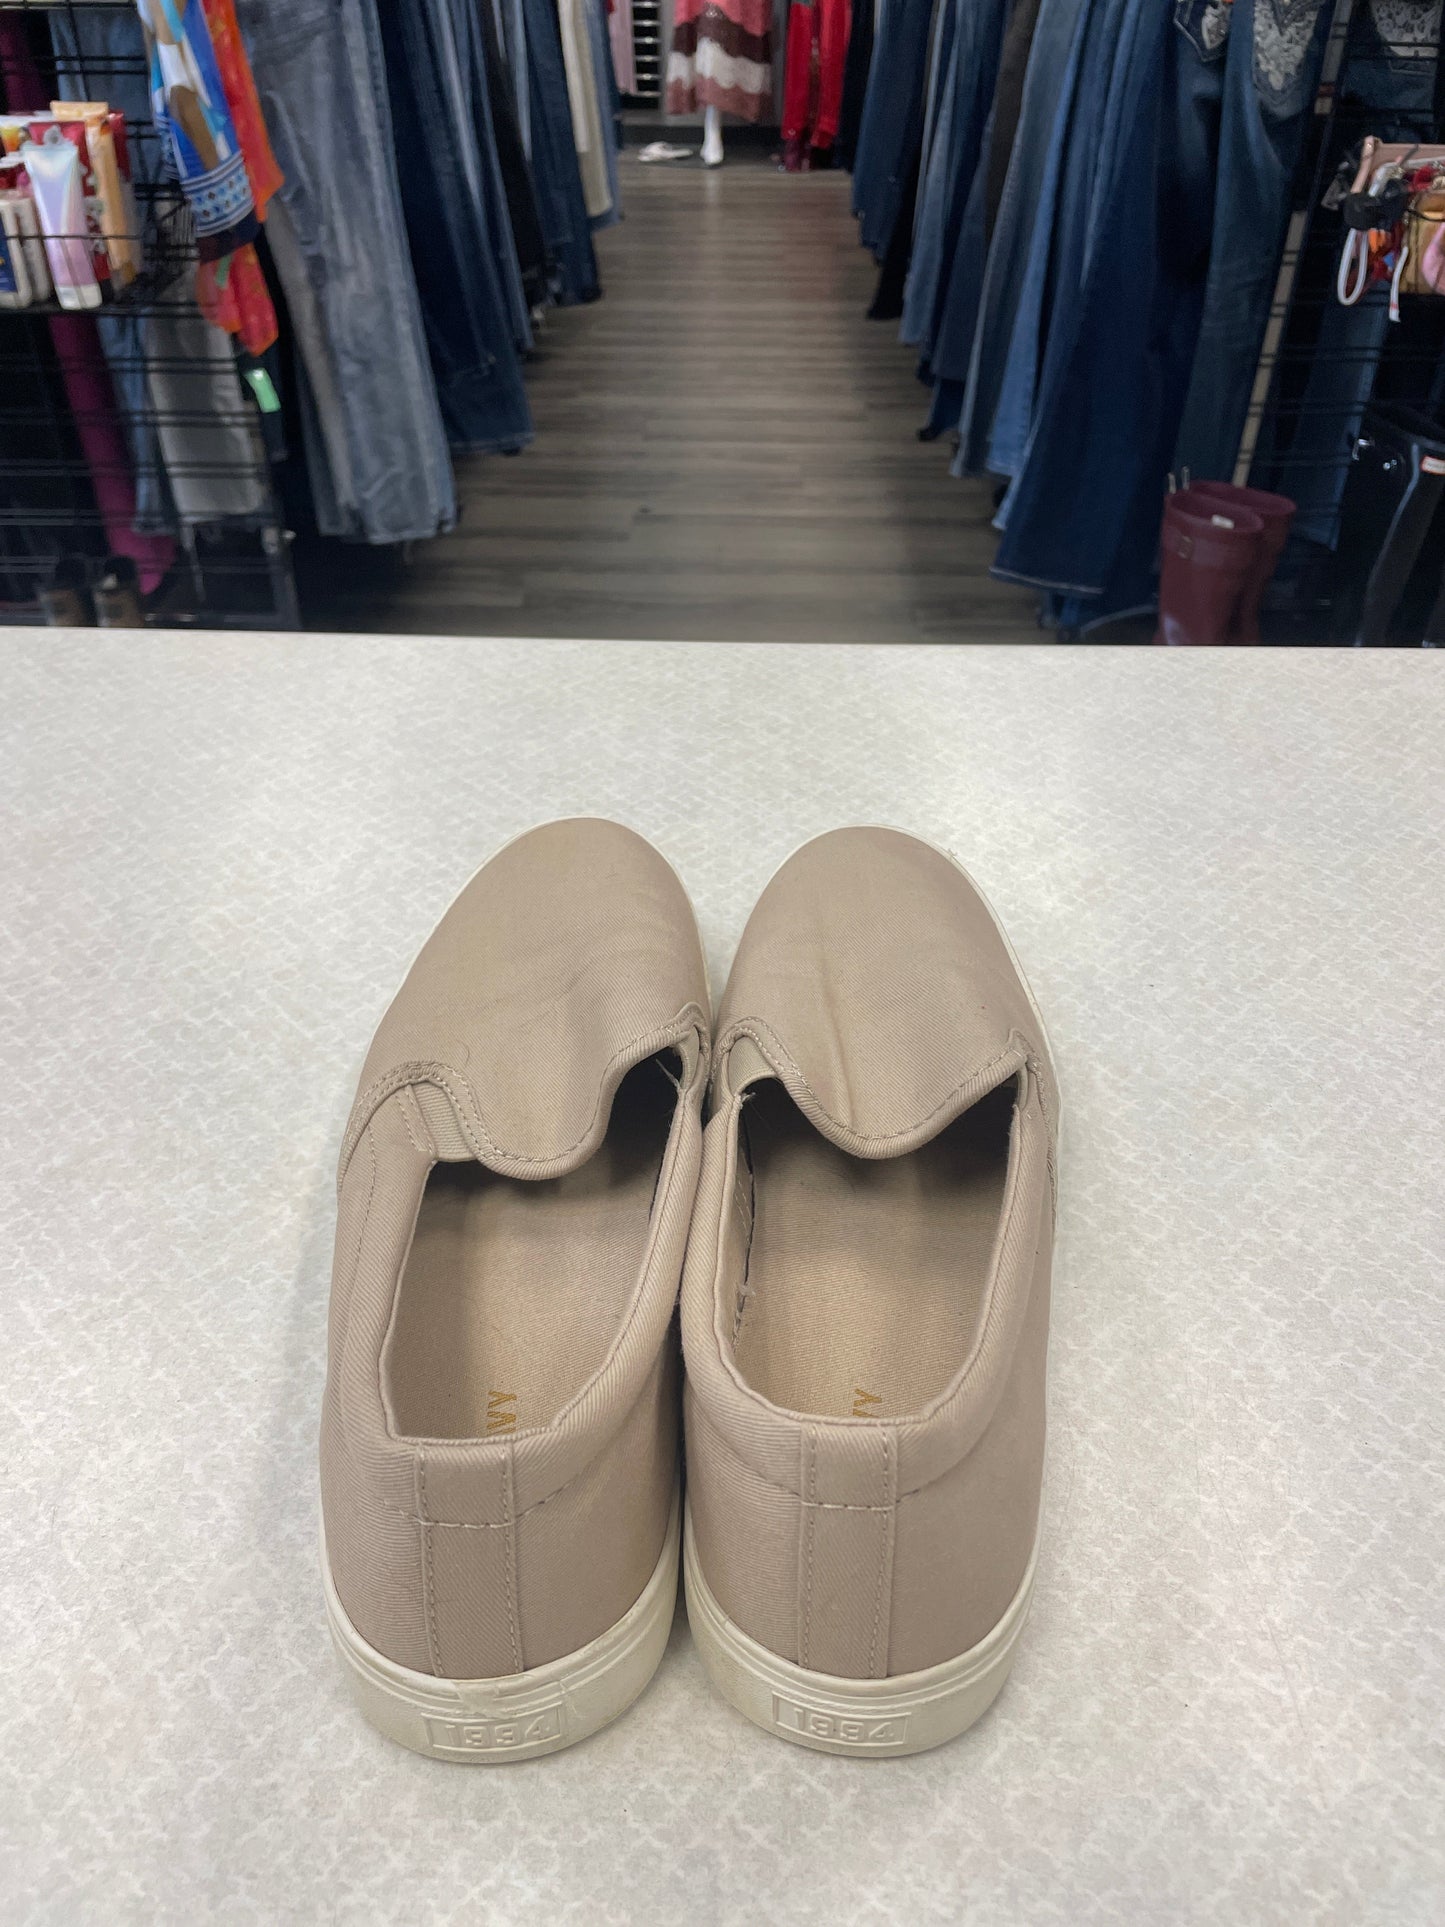 Tan Shoes Flats Old Navy, Size 8.5